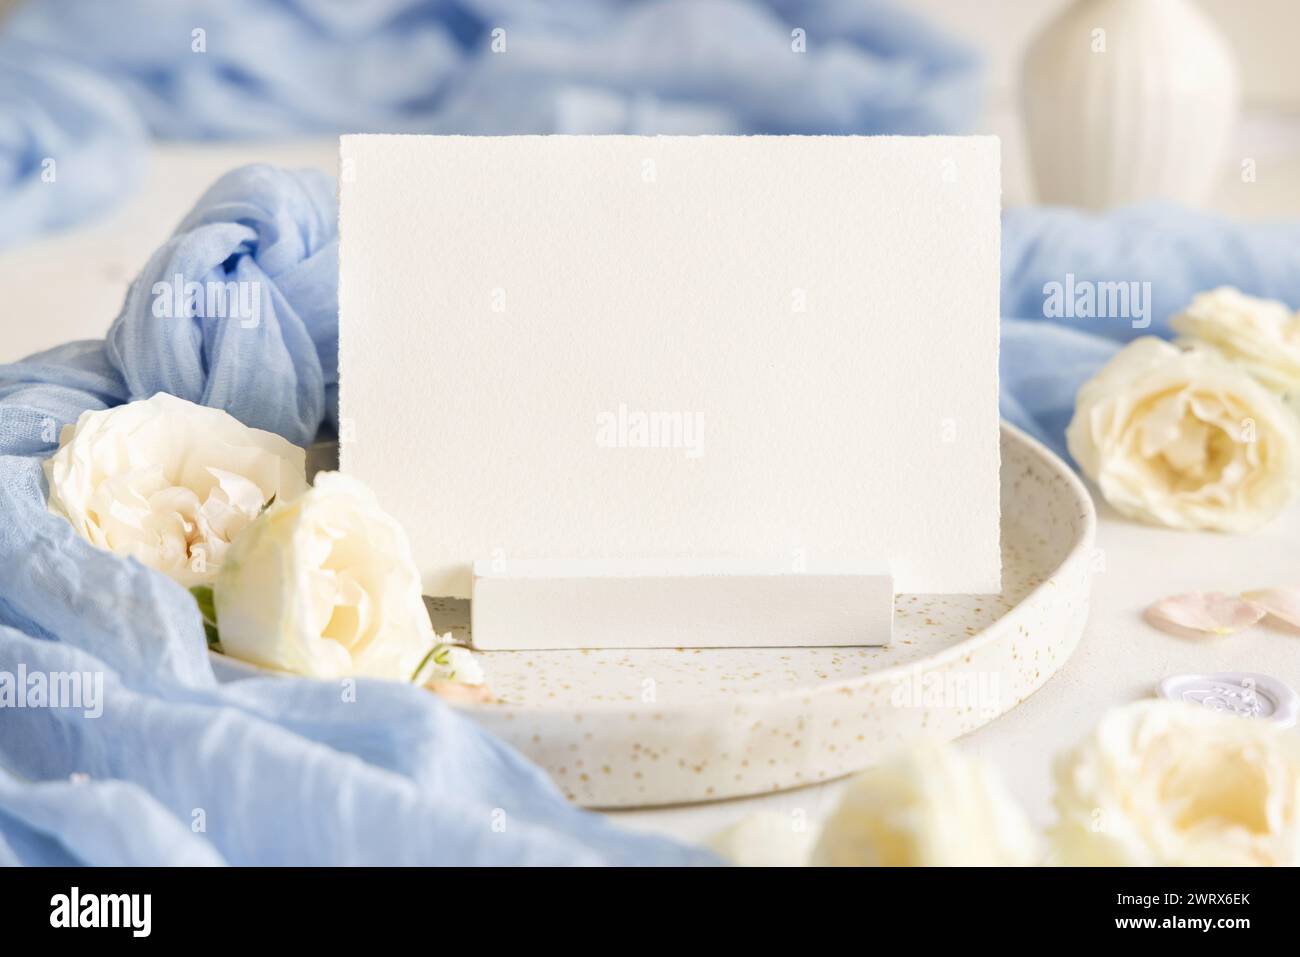 Blank card near light blue tulle fabric and cream flowers on plate close up, copy space. Wedding stationery mockup. Romantic table place with horizont Stock Photo